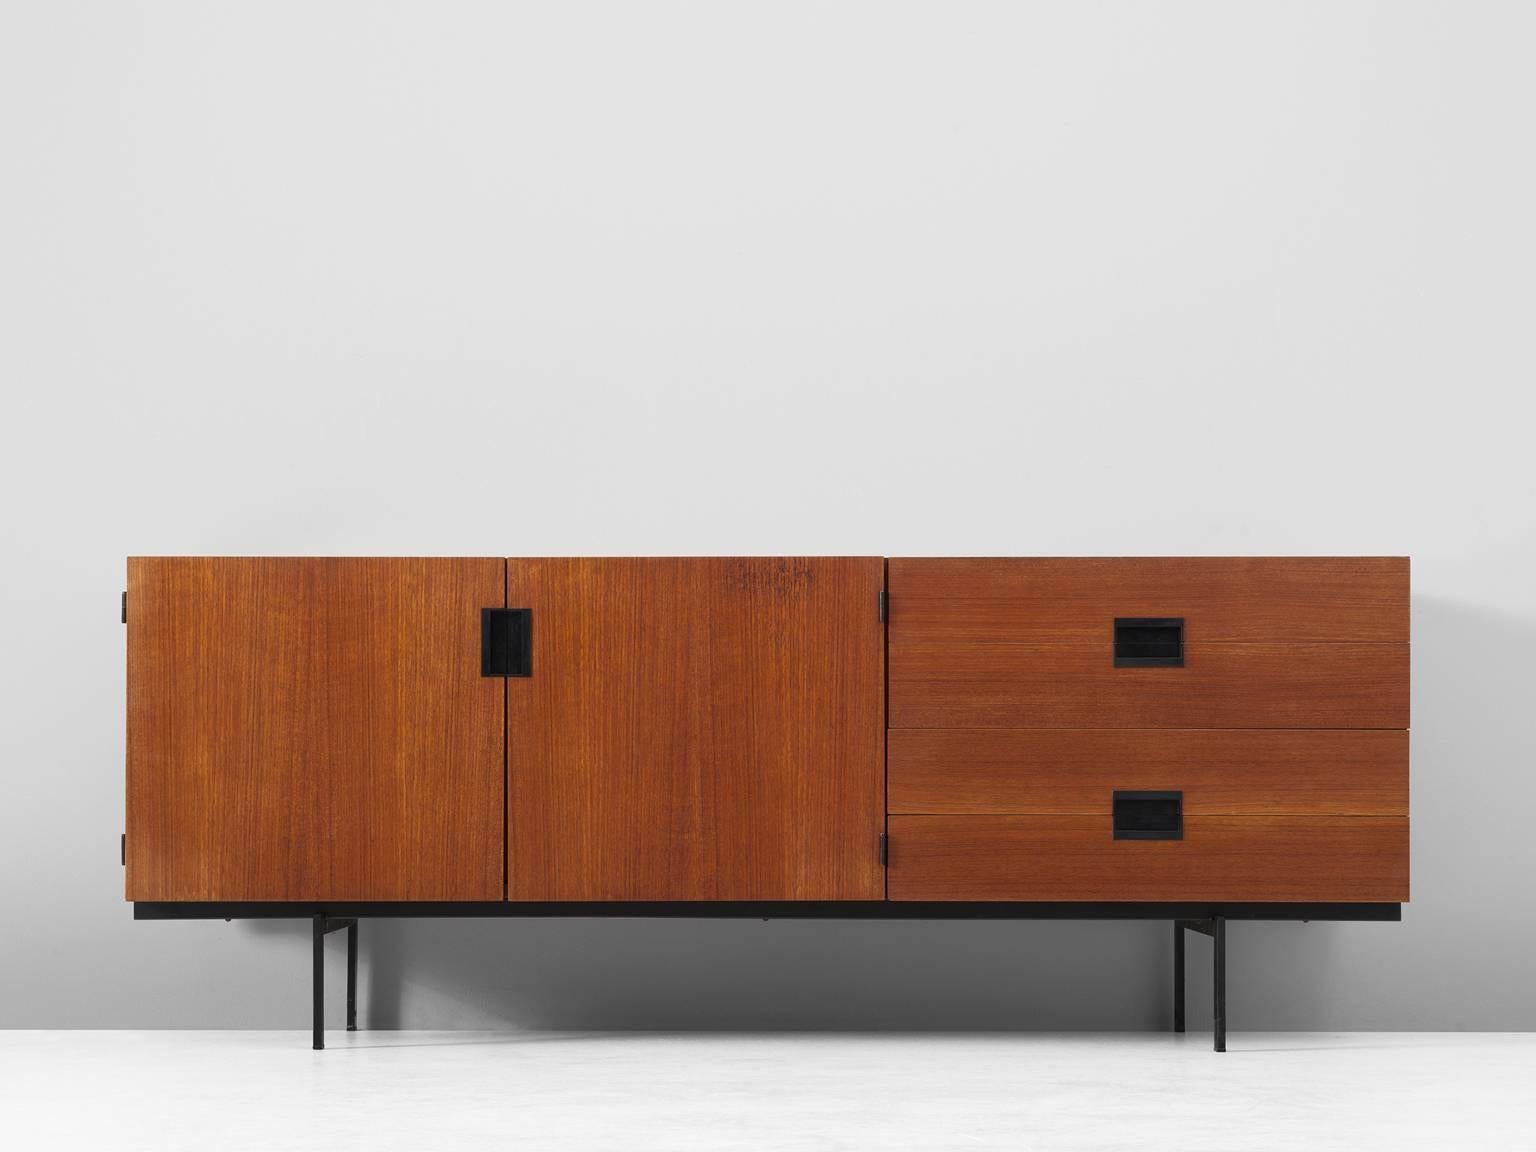 Sideboard model DU04, in teak and metal by Cees Braakman for UMS Pastoe, The Netherlands, 1958. 

Elegant and modest teak sideboard by Cees Braakman for UMS Pastoe. This sideboard consist of a small metal base, which create some lightness to the